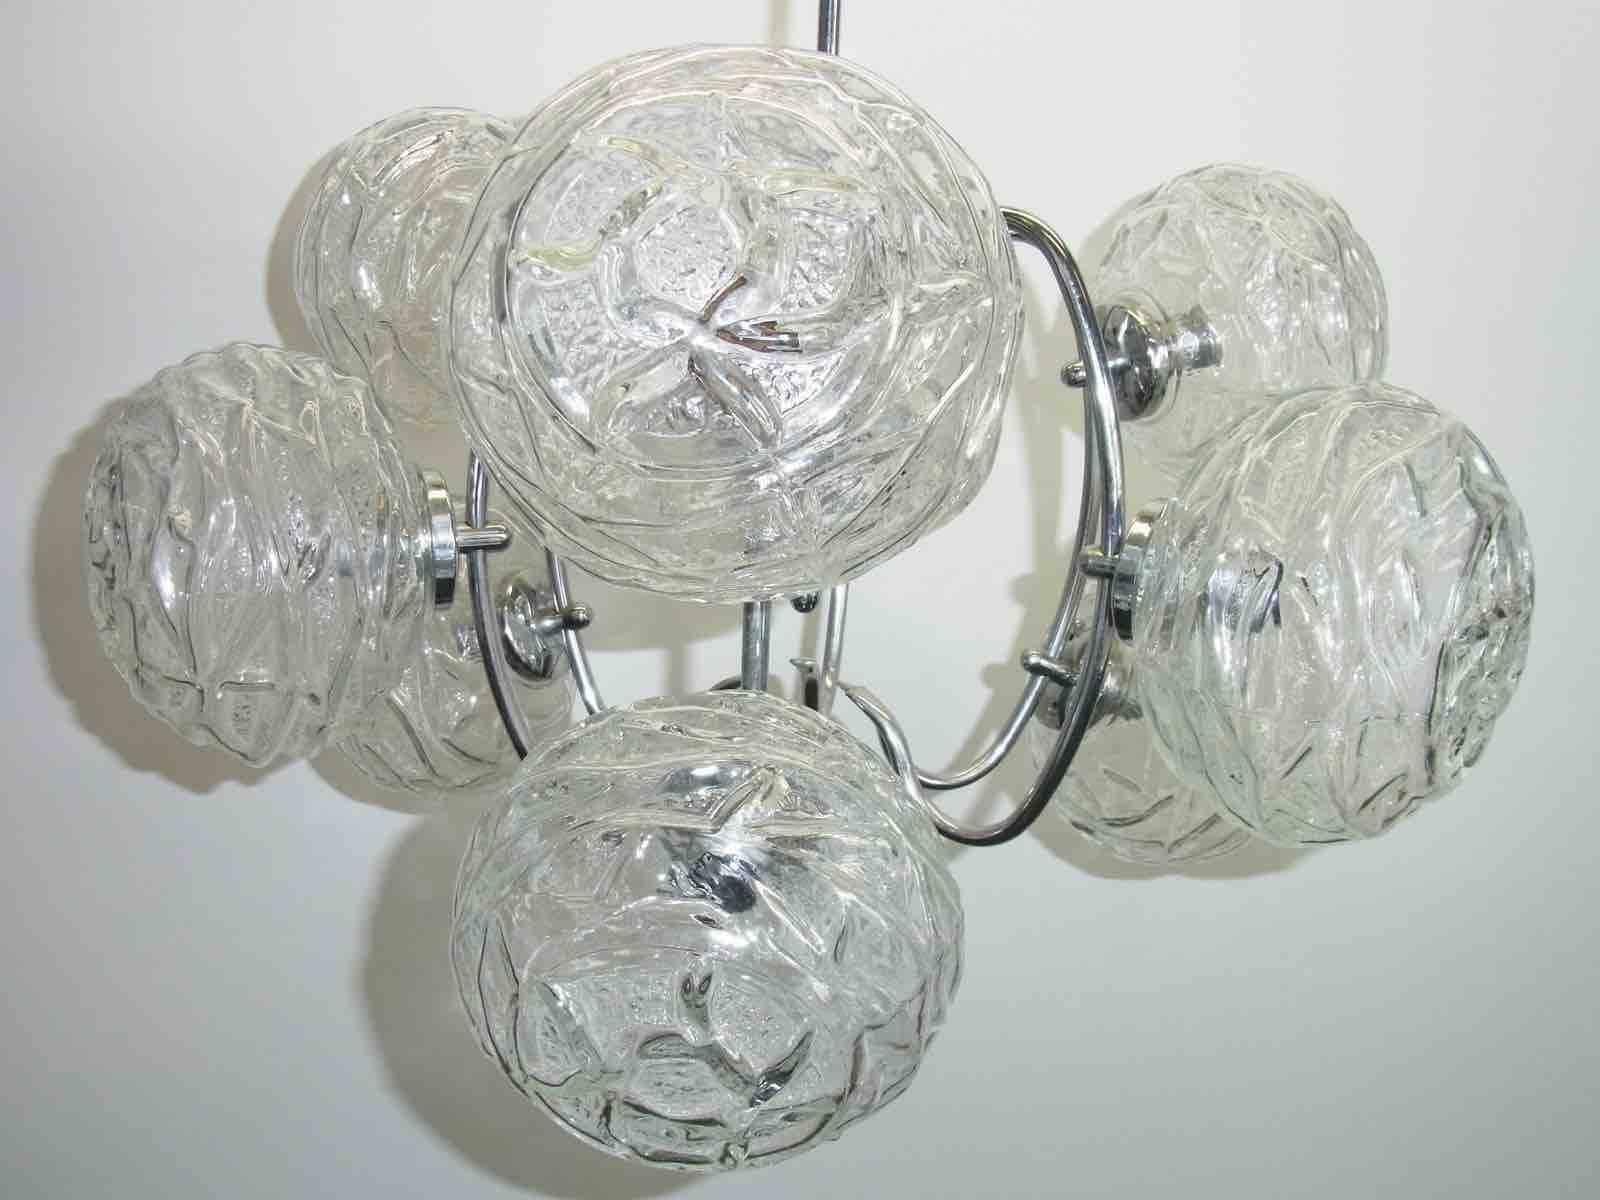 German Mid-Century Modern Polished Chrome and Glass Ball Chandelier For Sale 2